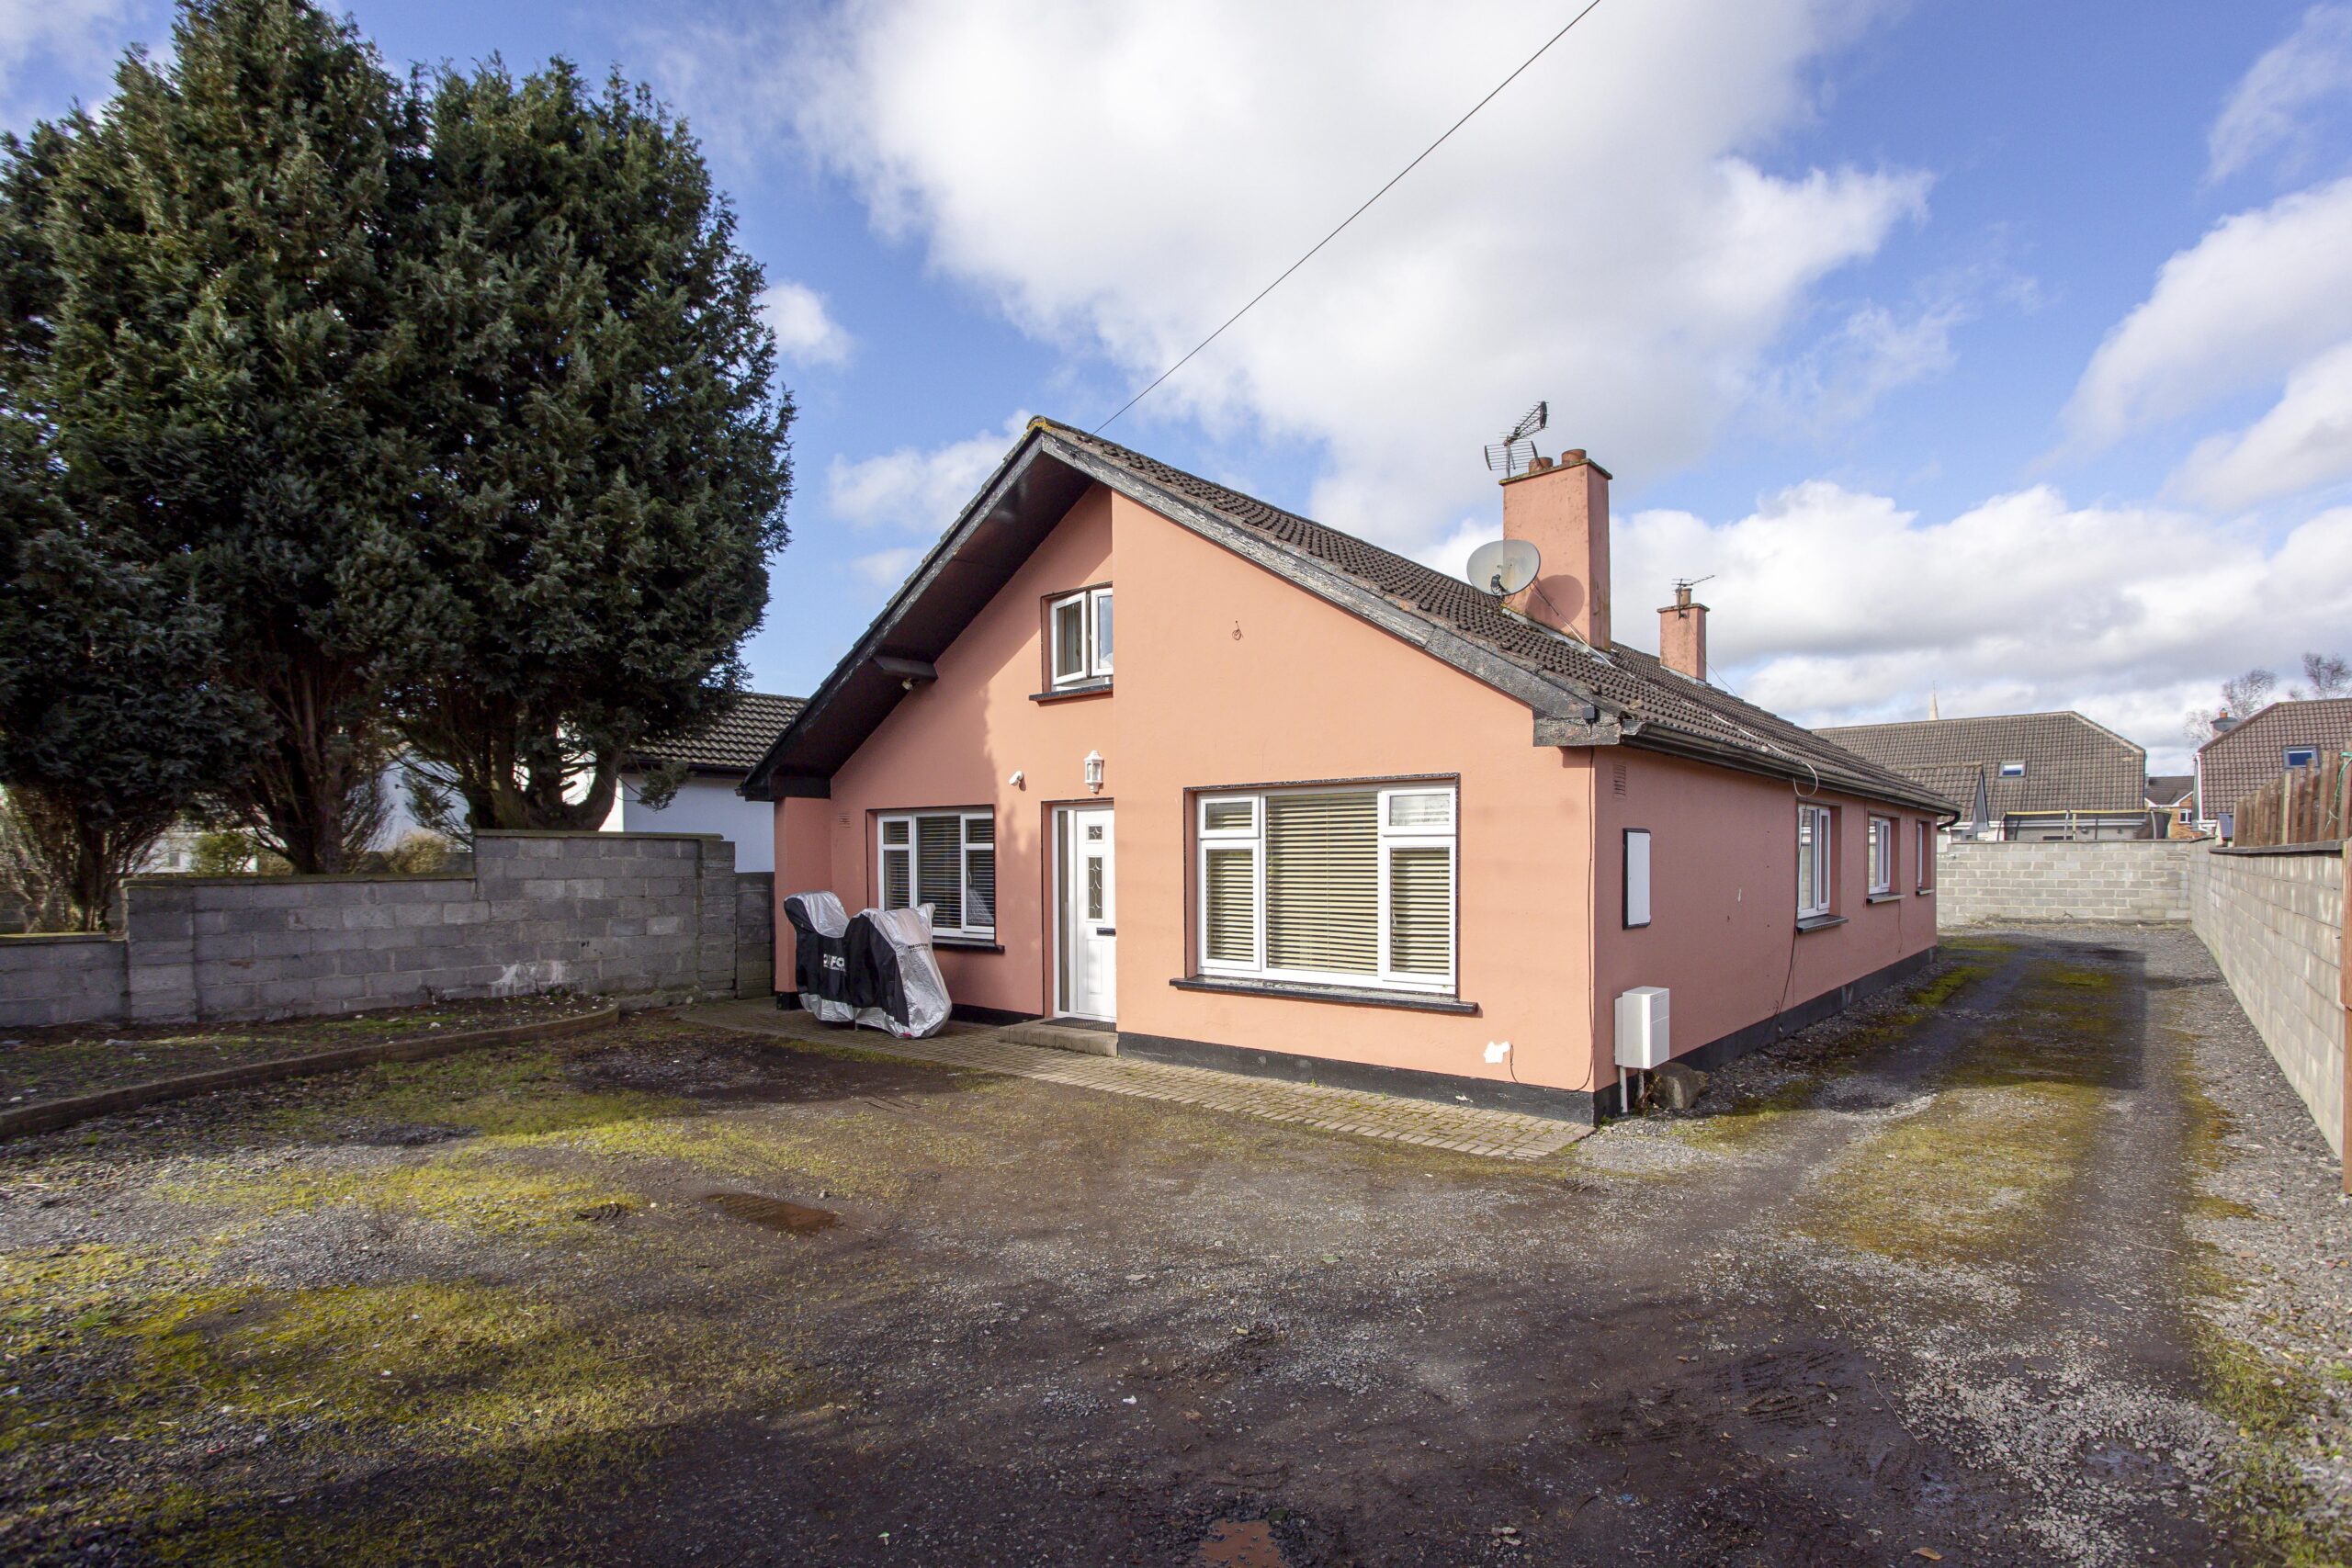 348A Old Greenfield, Maynooth, Co. Kildare, W23 N7F3